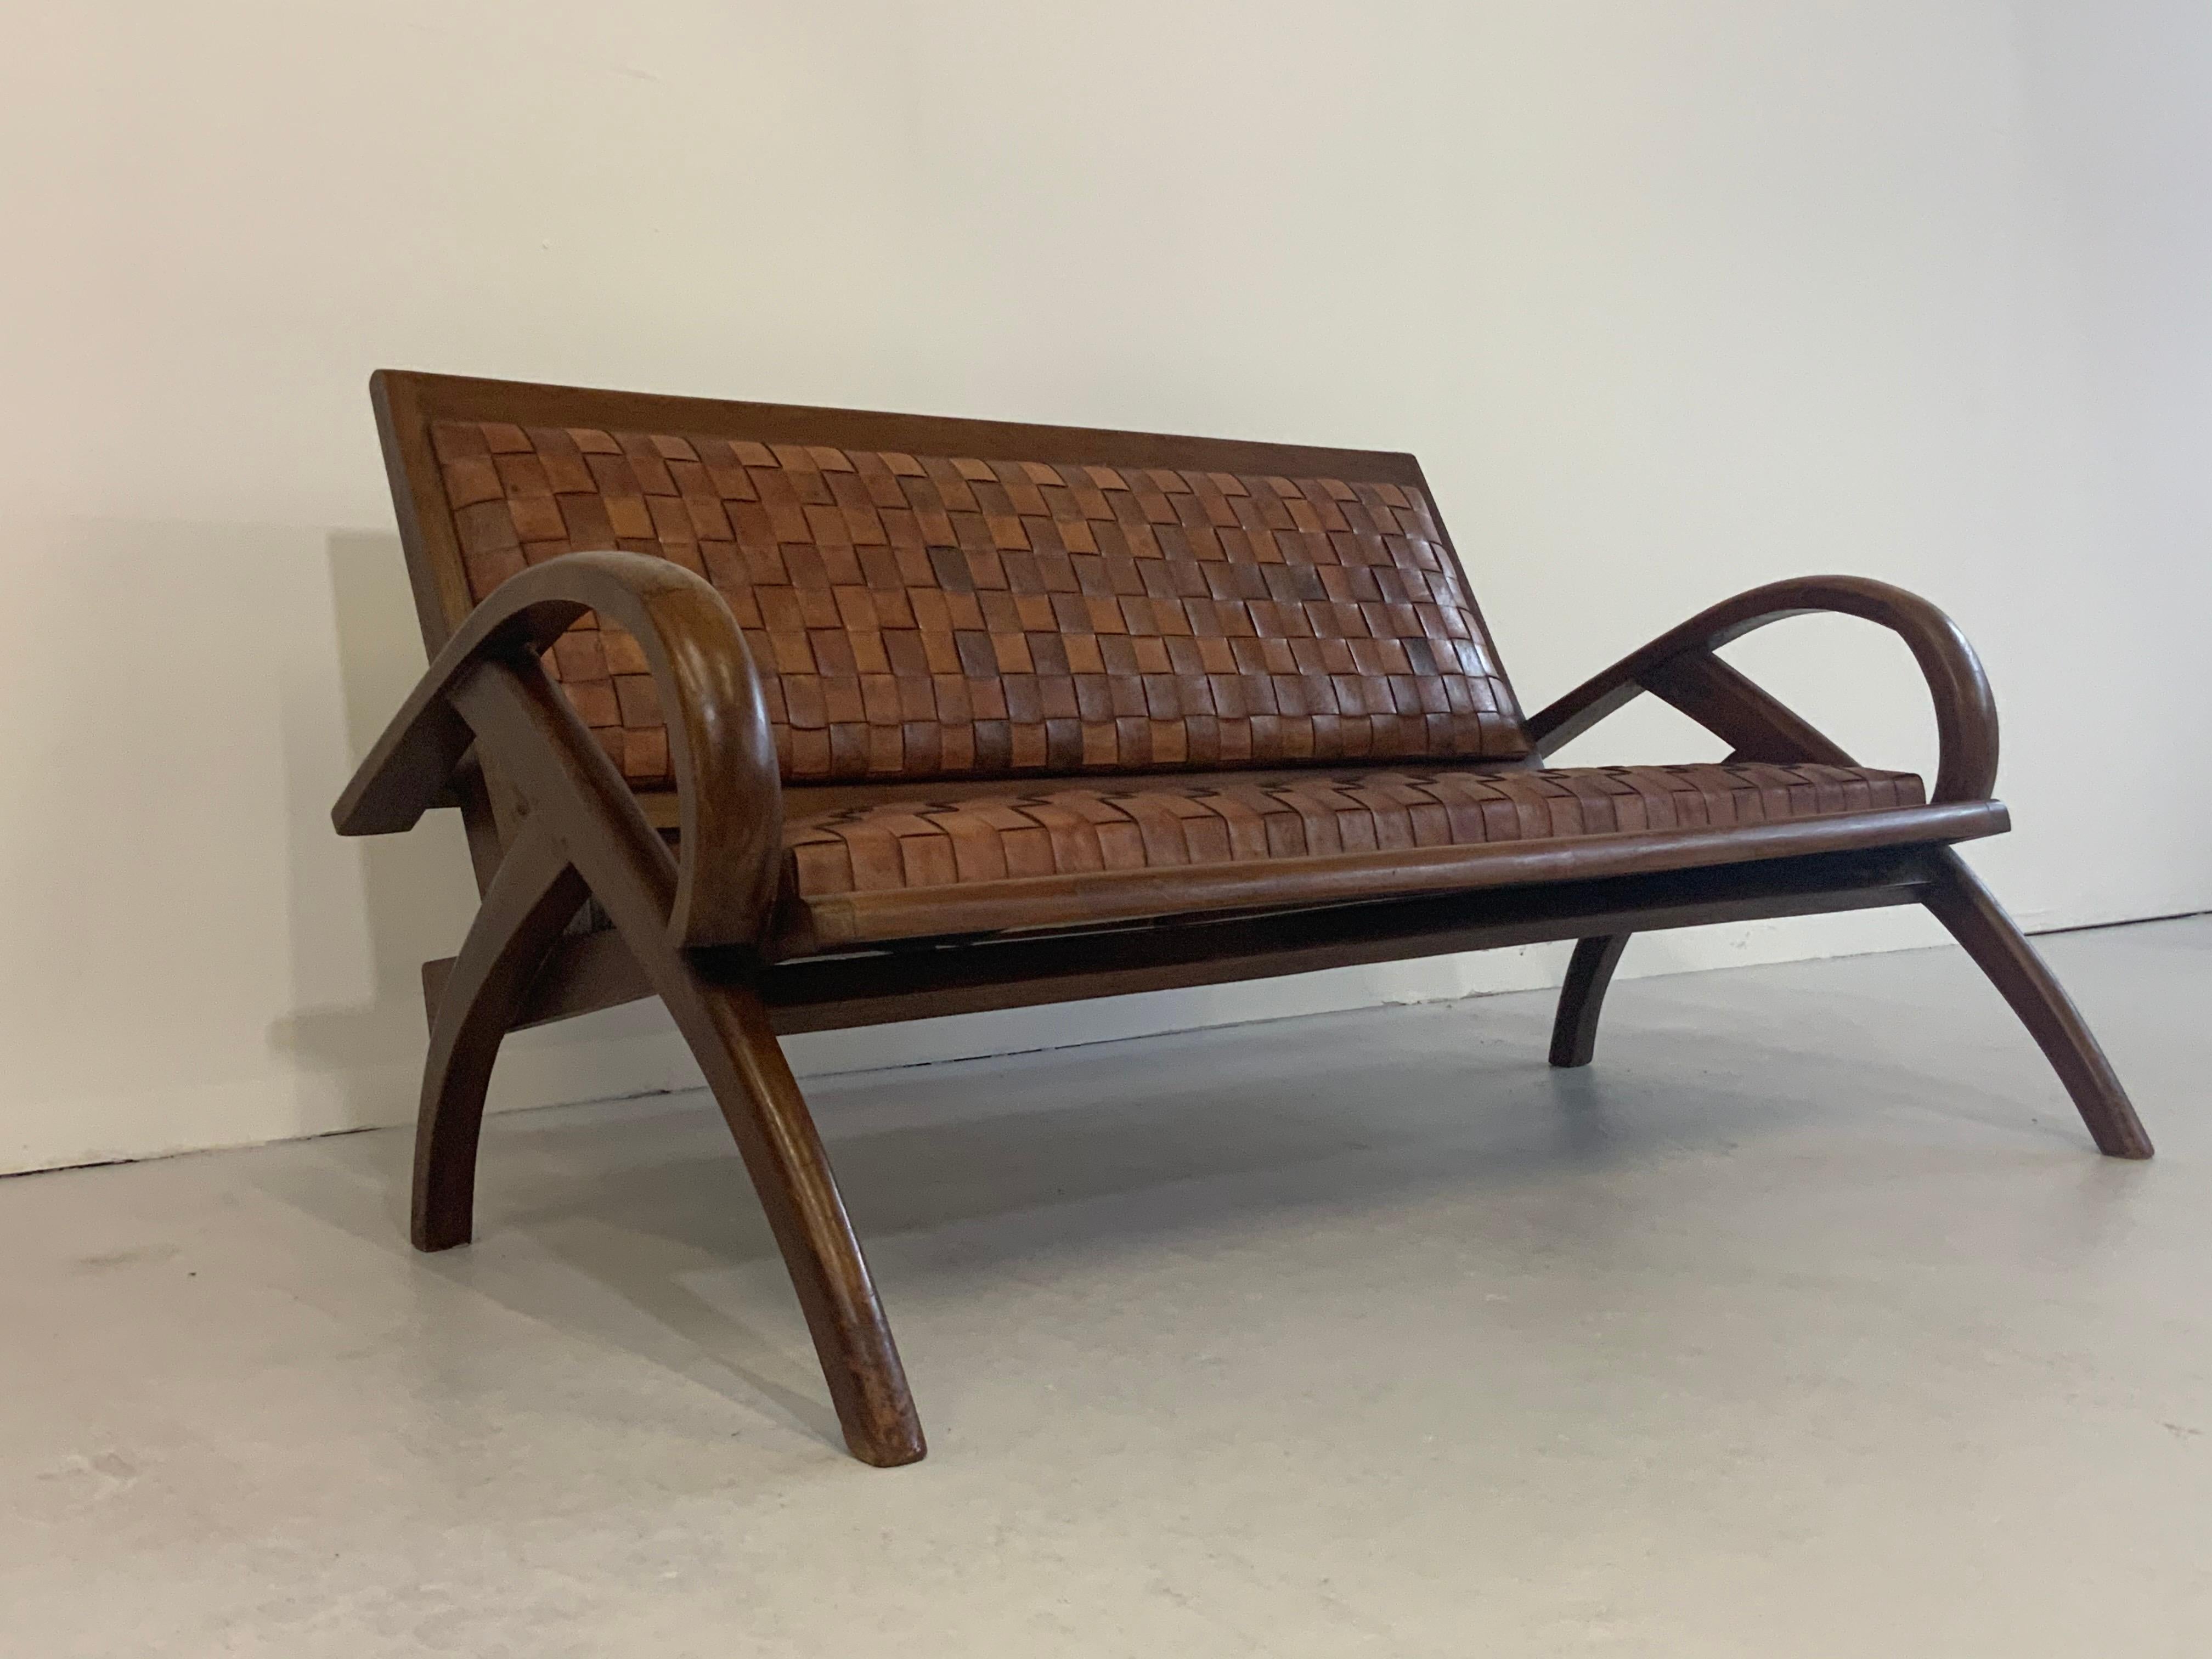 This captivatingly beautiful & very rare bench, settee ( 2-seat ) is a classical Scandinavian/ Danish Modern design beauty from 1950s-1960s. 

Special features are the thick webbed - marvellous patinated - leather stripes in cognac brown and the